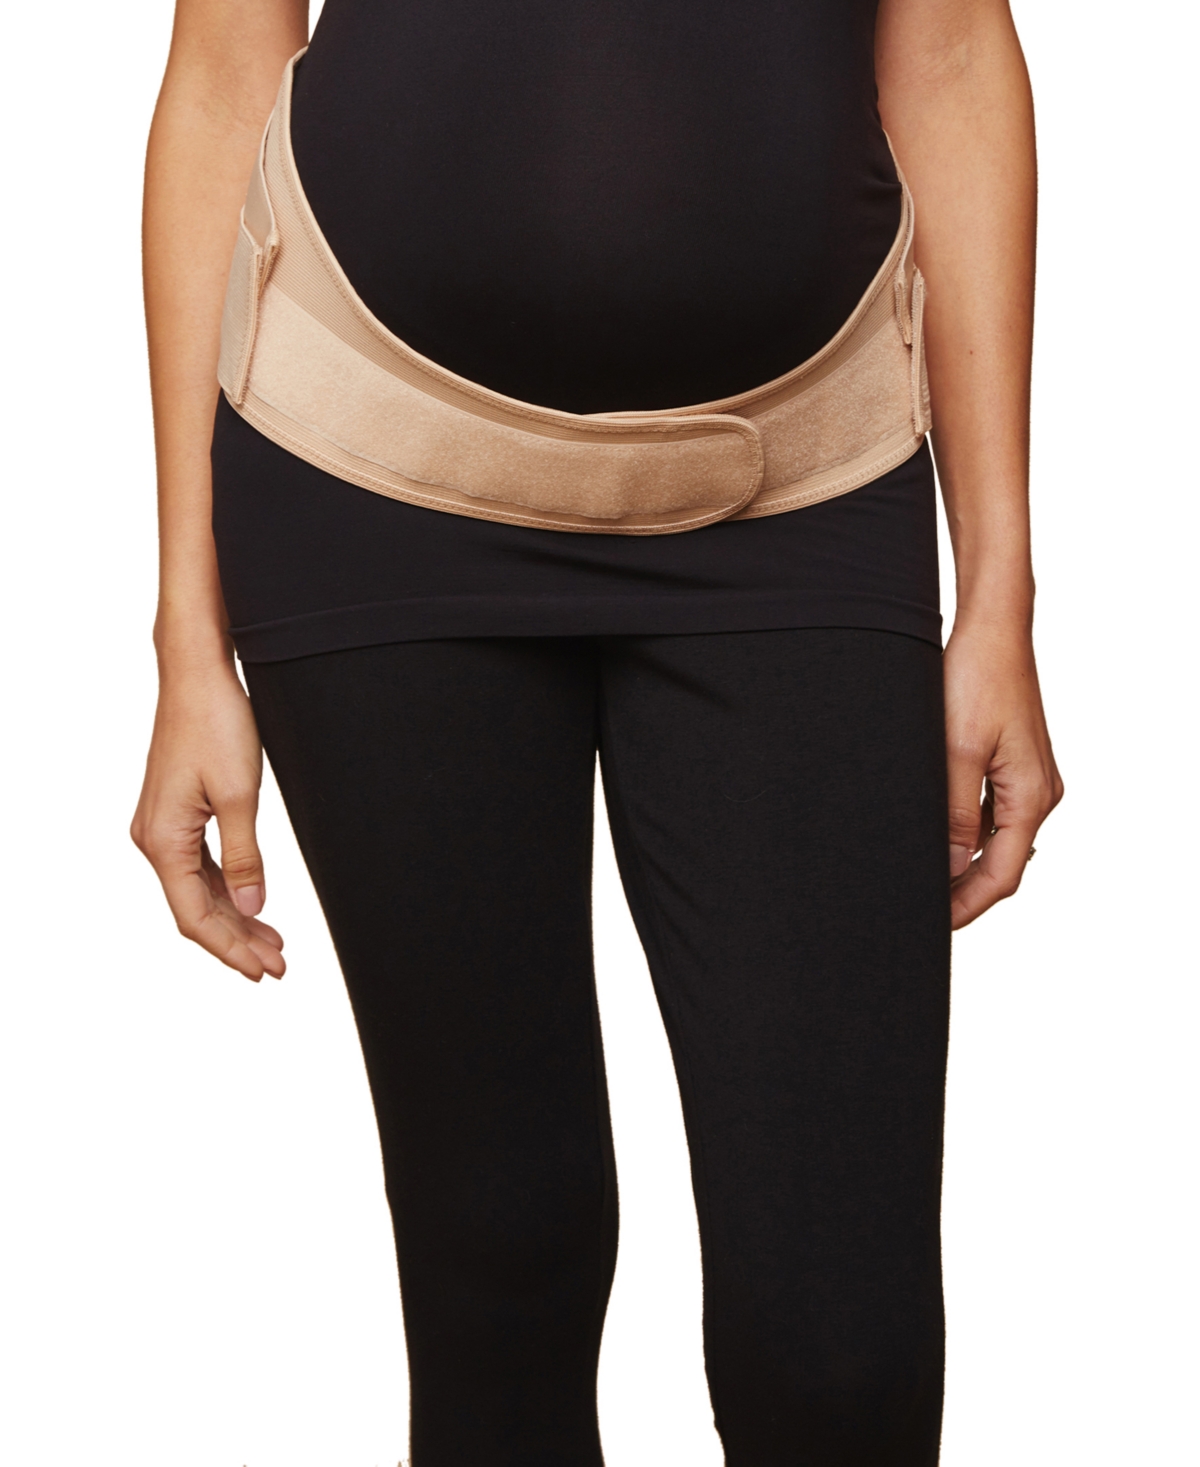 Revive 3-in-1 Postpartum Recovery Support Belt (Midnight Black)